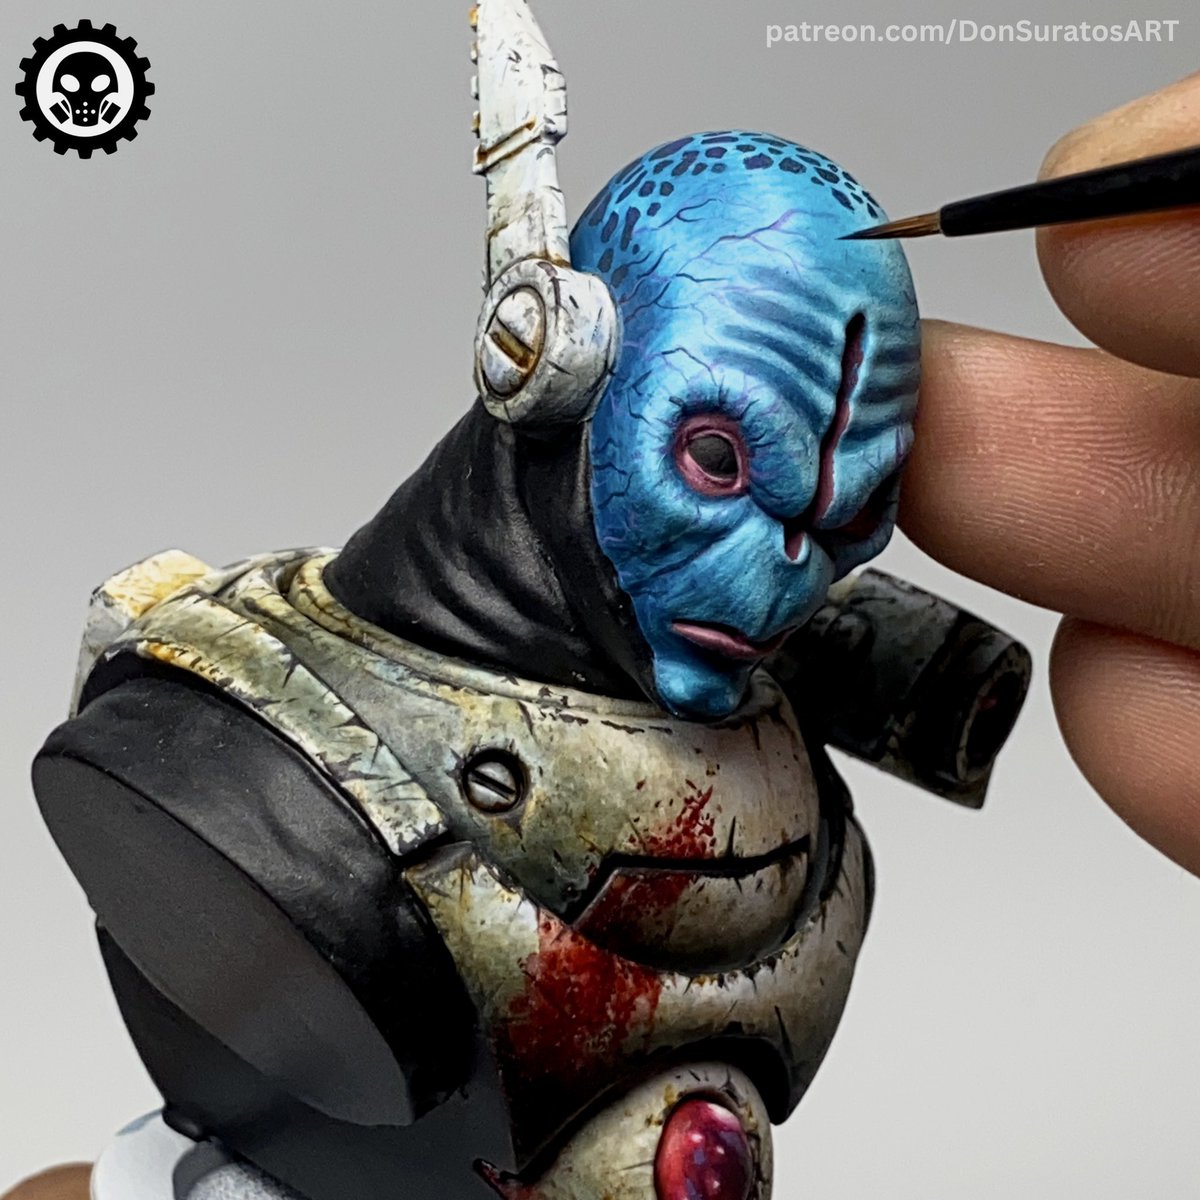 🔴 WIP 🚧 Blue Stressed Skin 😅

More at Patreon as usual. STL also available at Patreon. 

Painting with @thearmypainter Warpaints Fanatic paints and washes as usual! 🥂 🎨🎨🎨

#patreoncreator #miniaturepainting #paintingminiatures #bust #armypainter #warpaintsfanatic